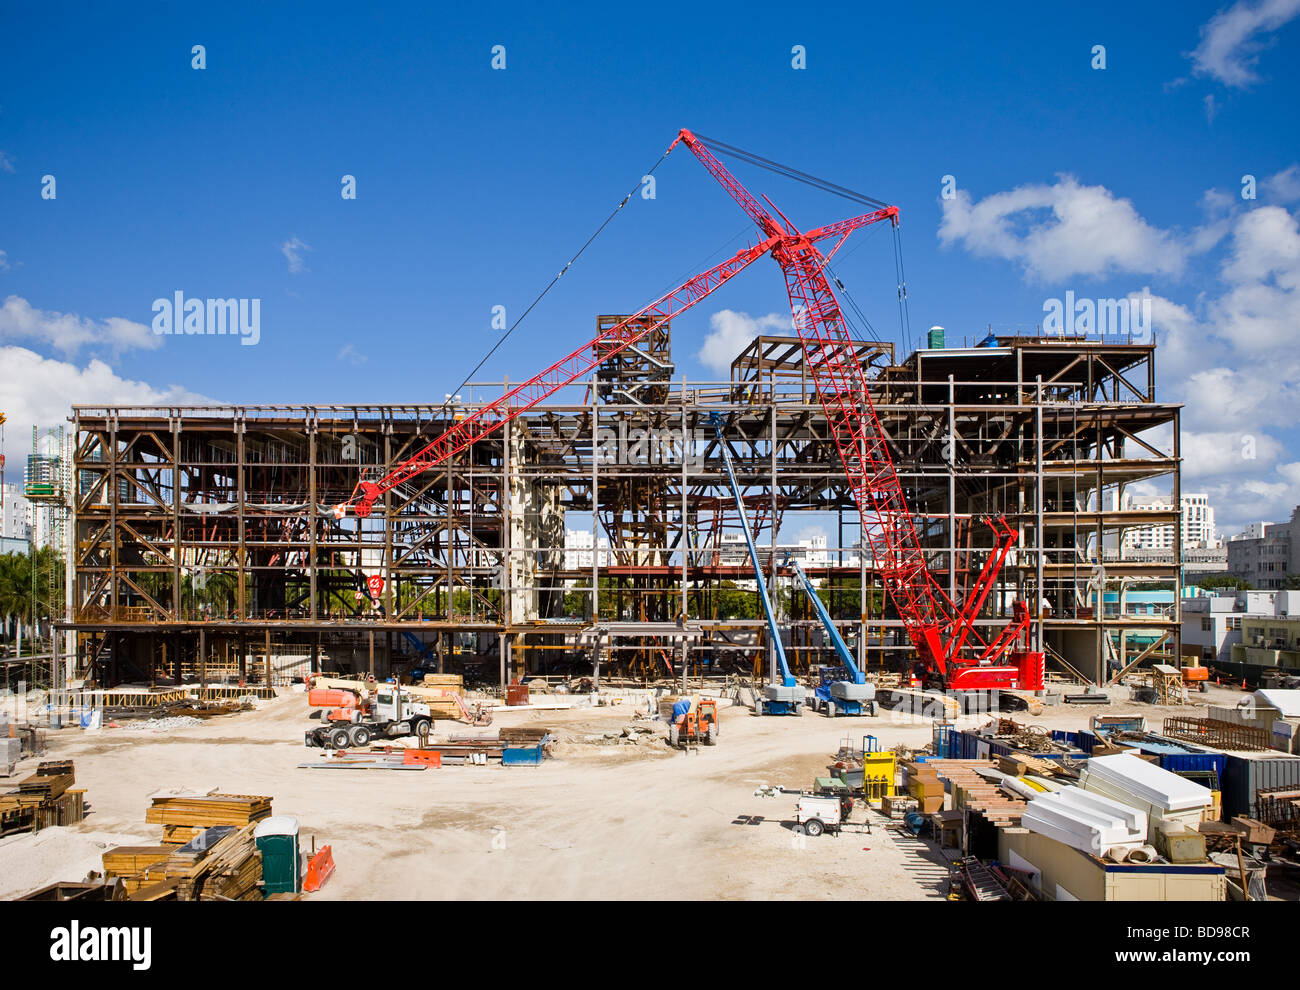 A construction site with blue sky and red crane. All logos, signs and other intellectual property have been digitally removed. Stock Photo